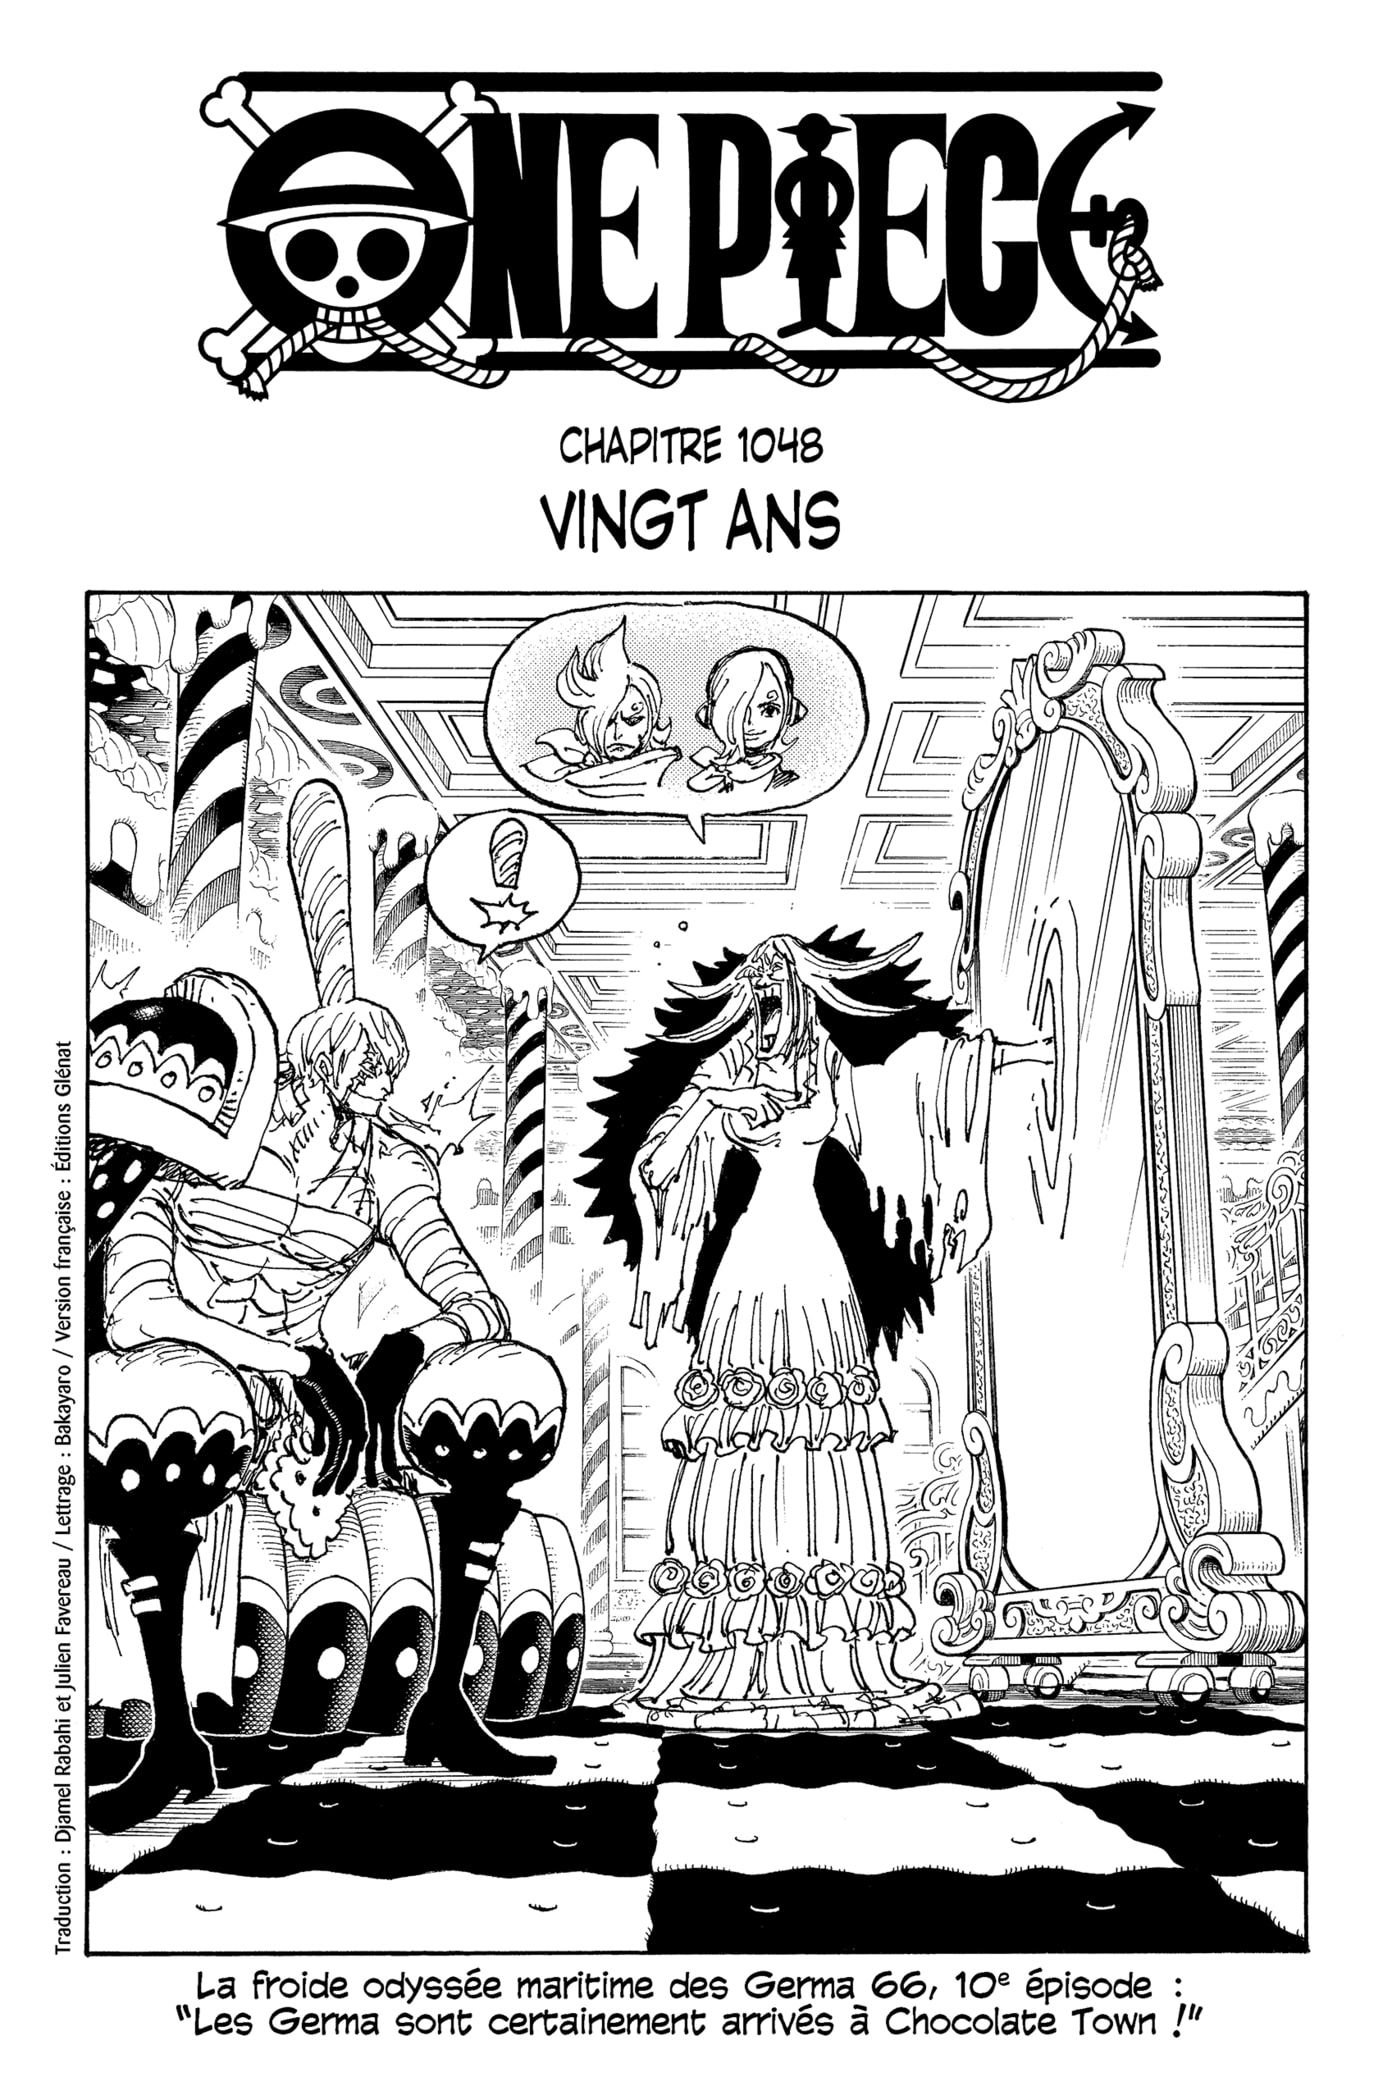 One Piece: Chapter 1048 - Page 1